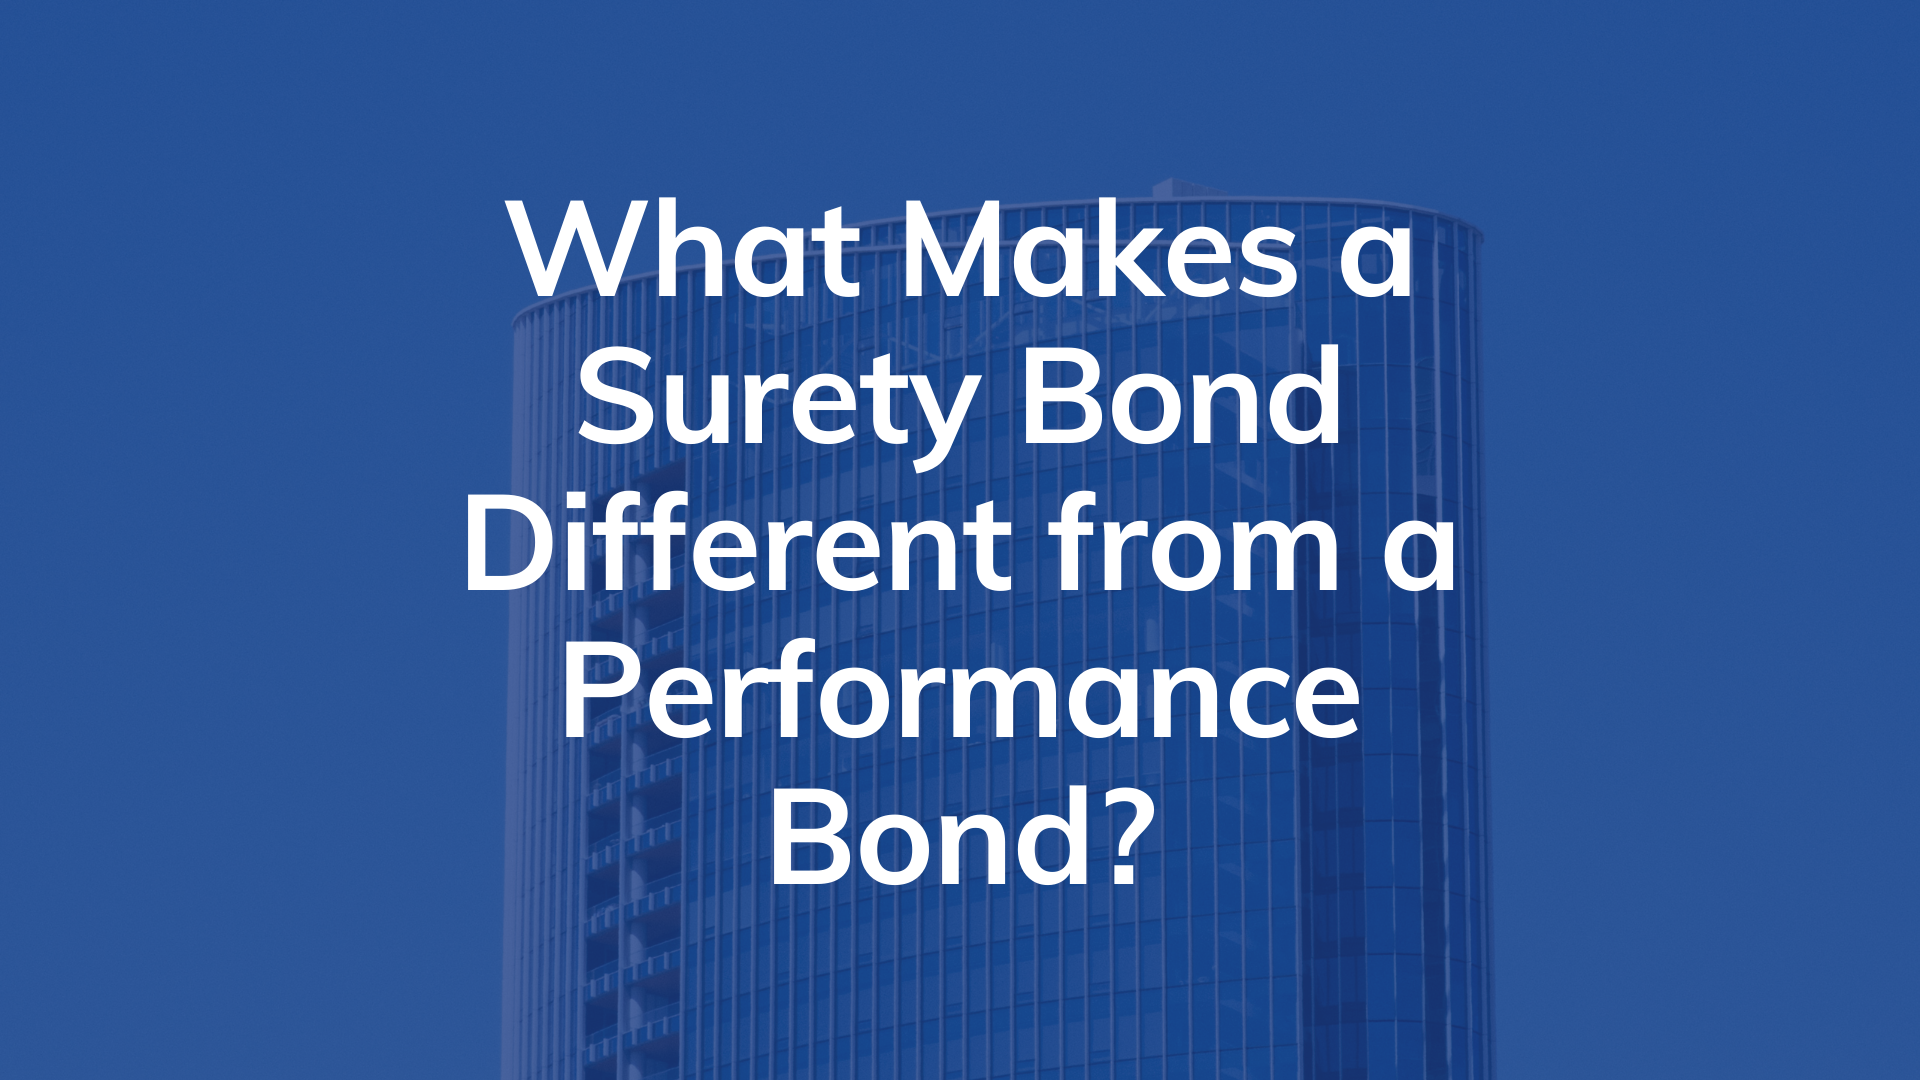 performance bond - What is a performance bond - buildings in blue shade